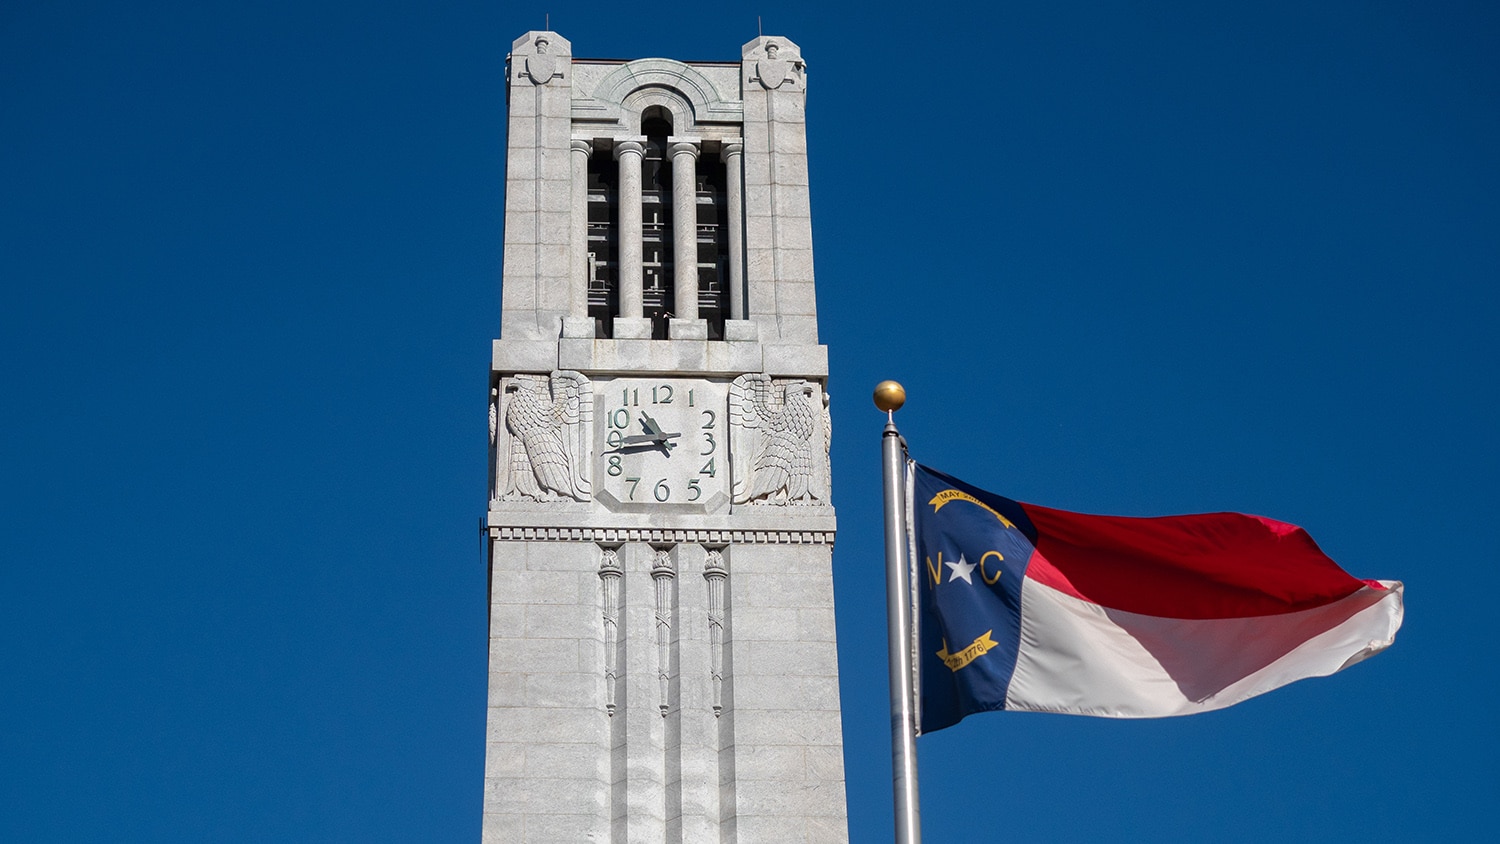 The state flag flies in front of the NC State Memorial Belltower on a fall morning.